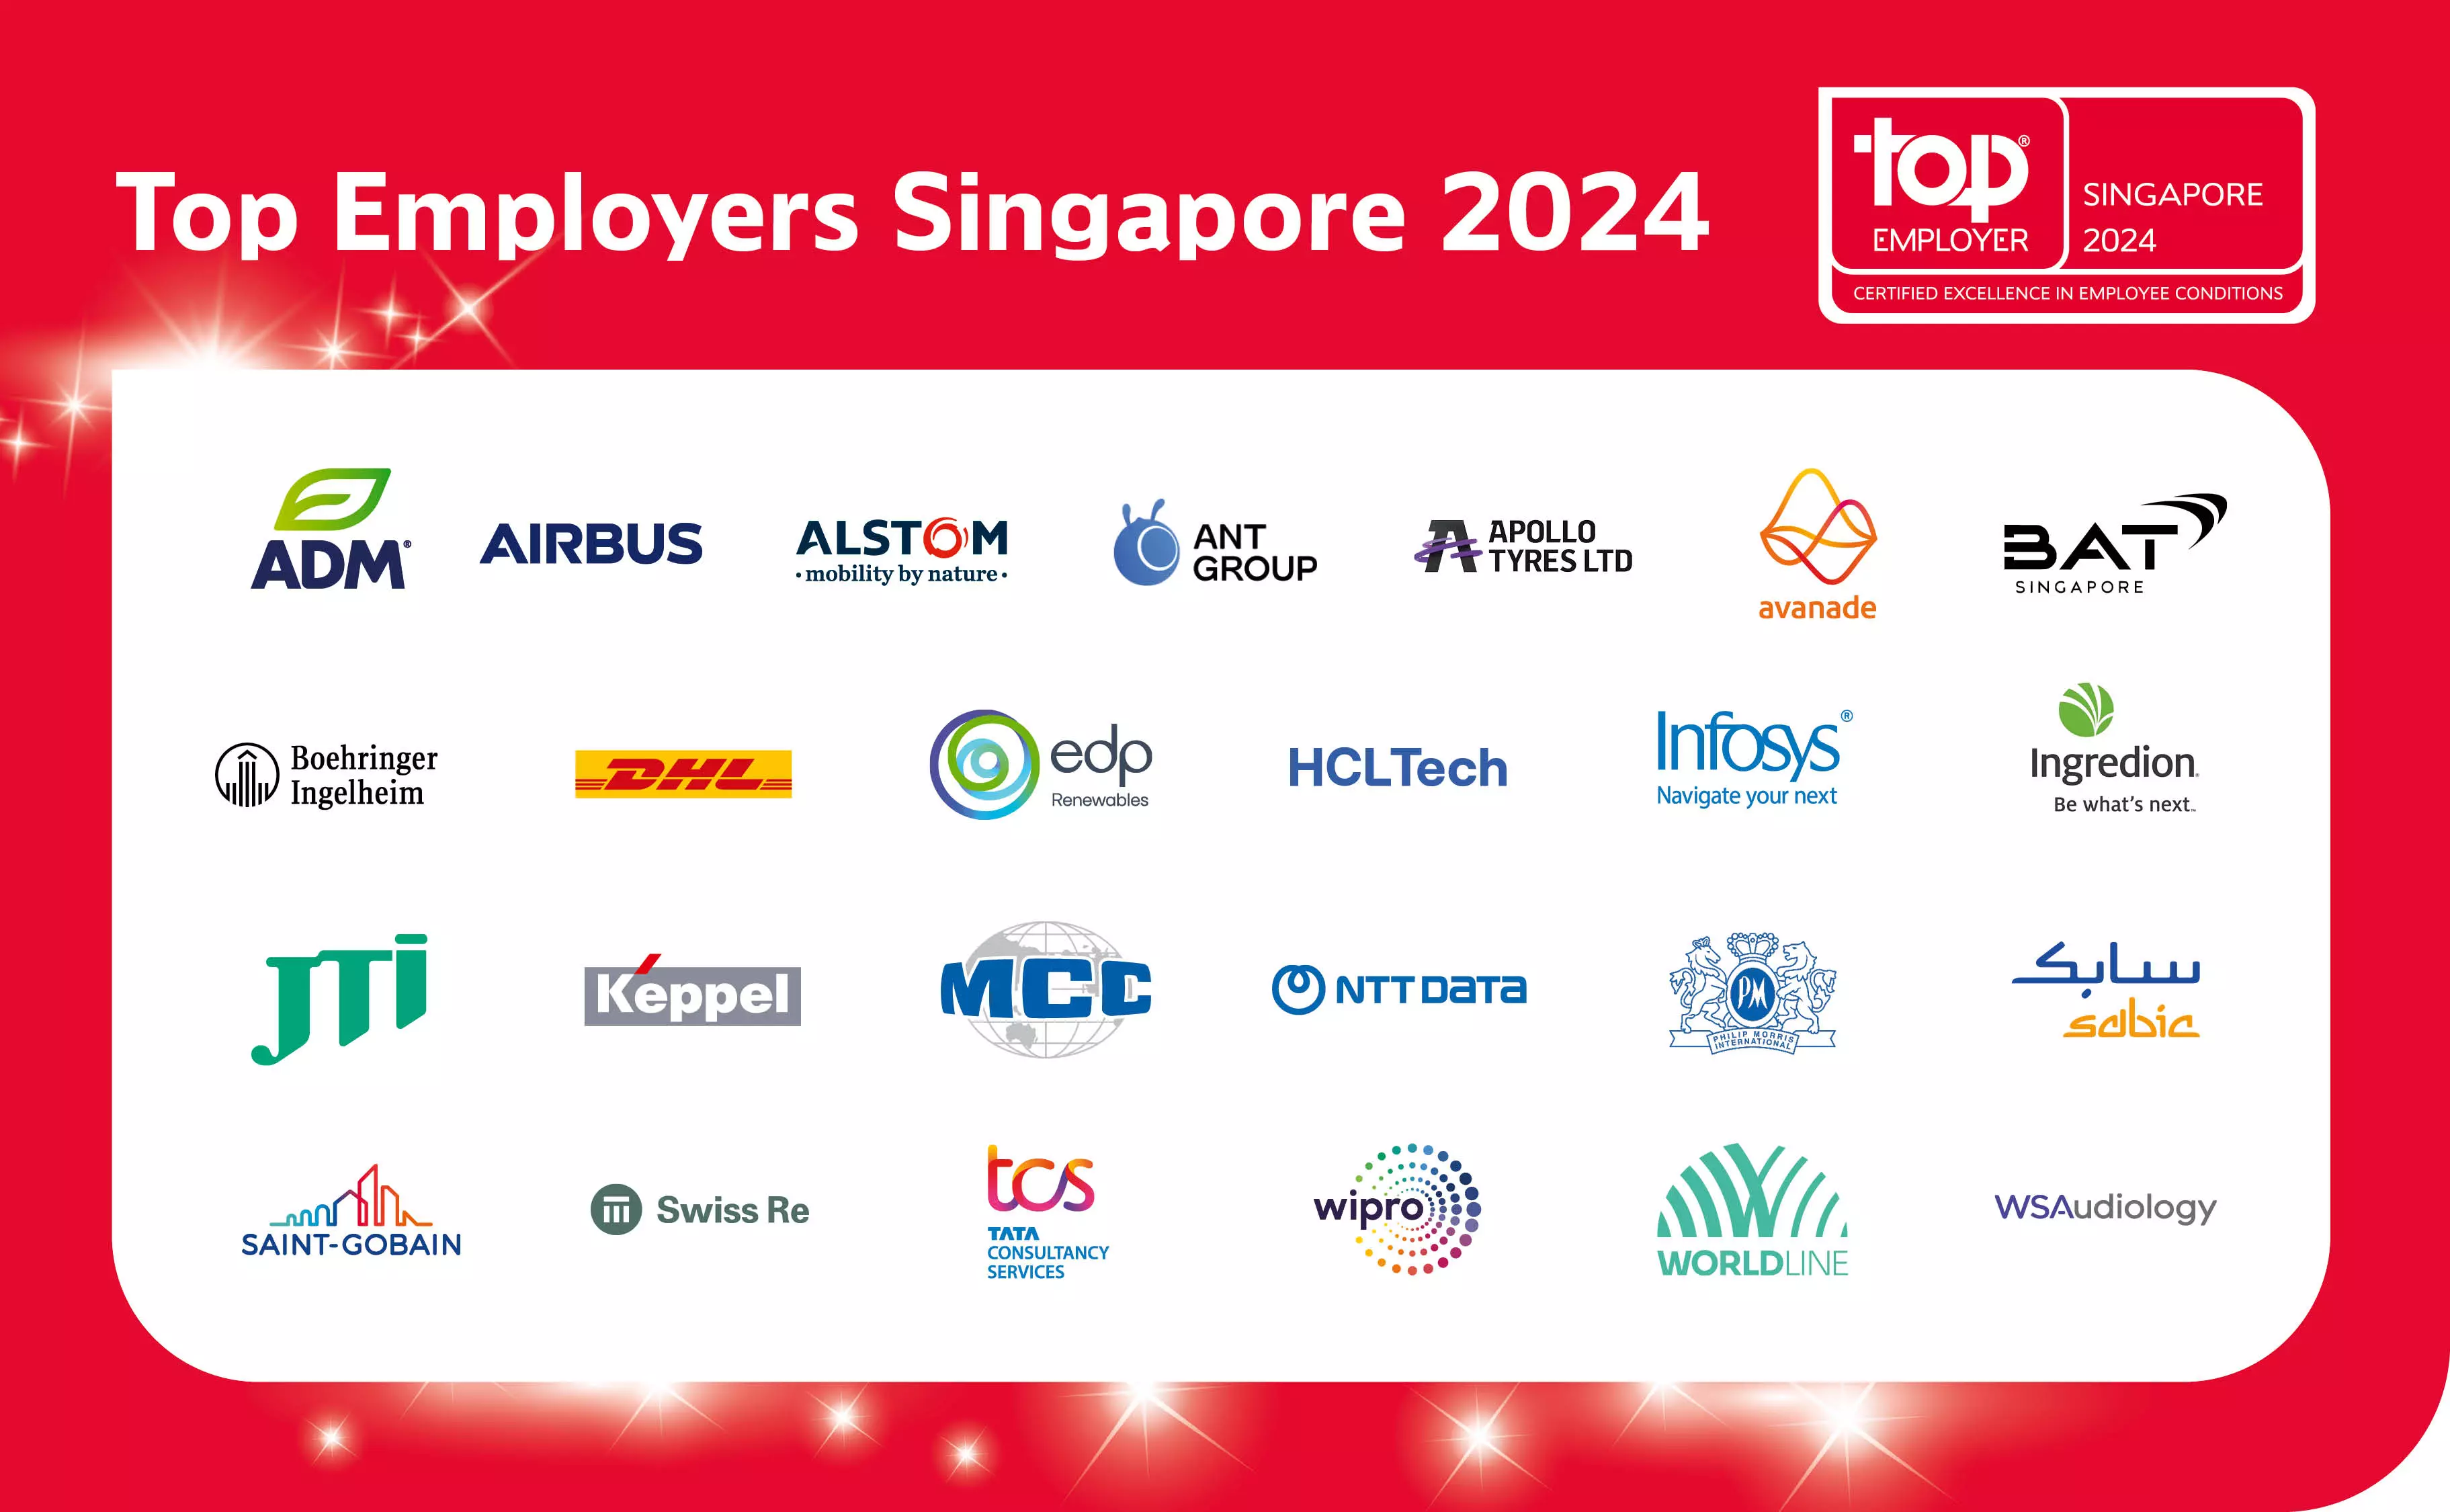 Proudly presenting Singapore's Top Employers 2024